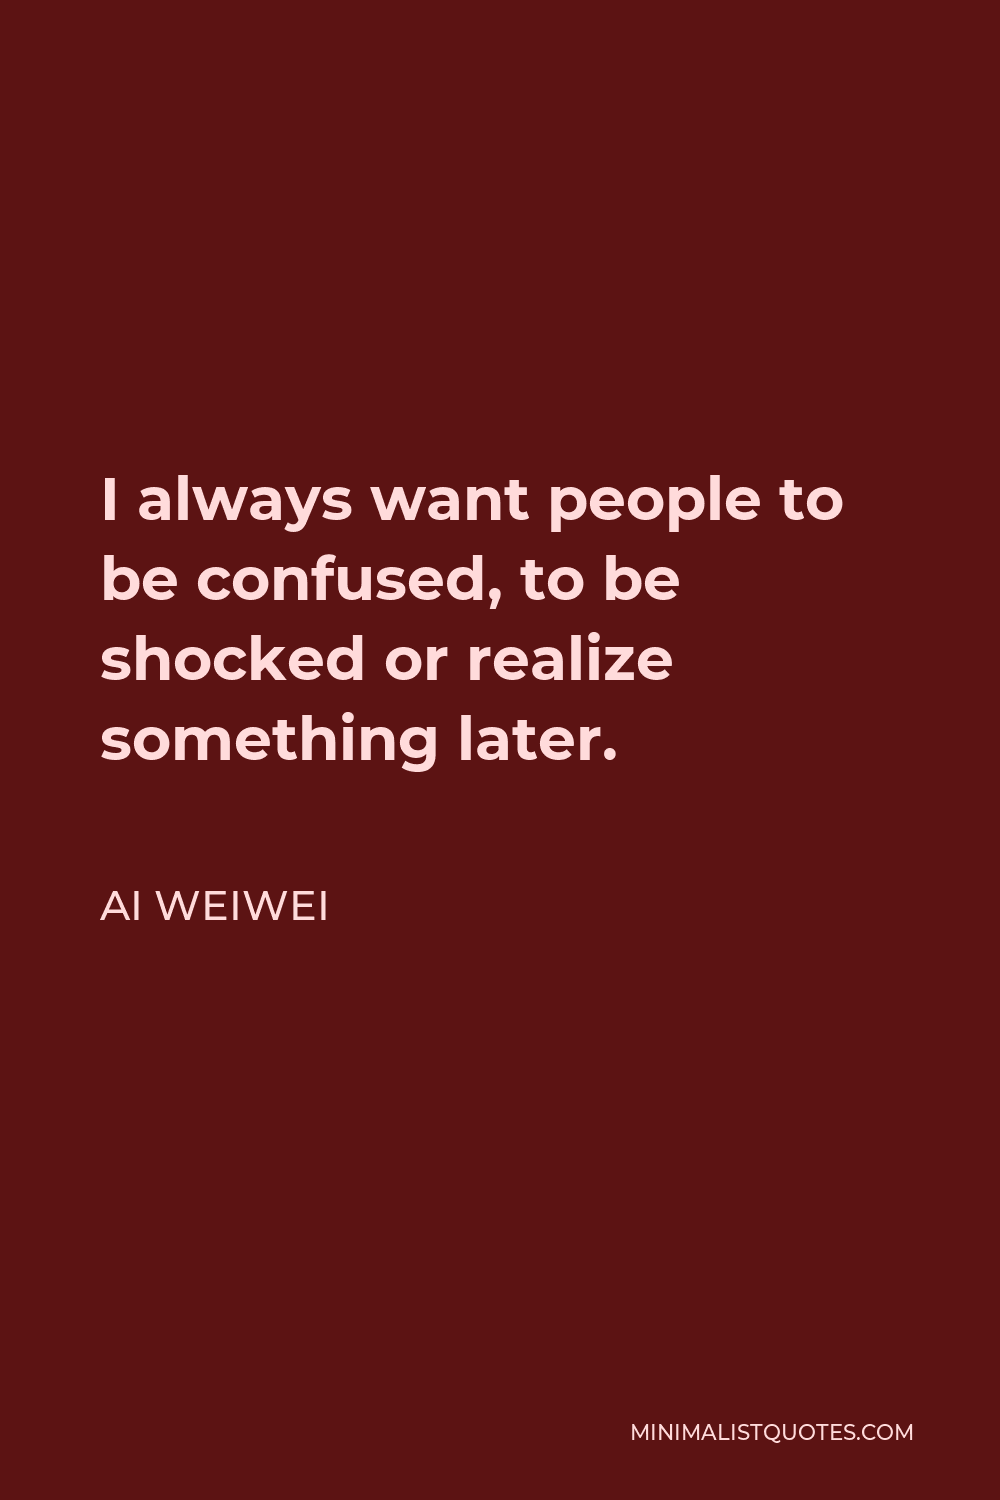 Ai Weiwei Quote - I always want people to be confused, to be shocked or realize something later.